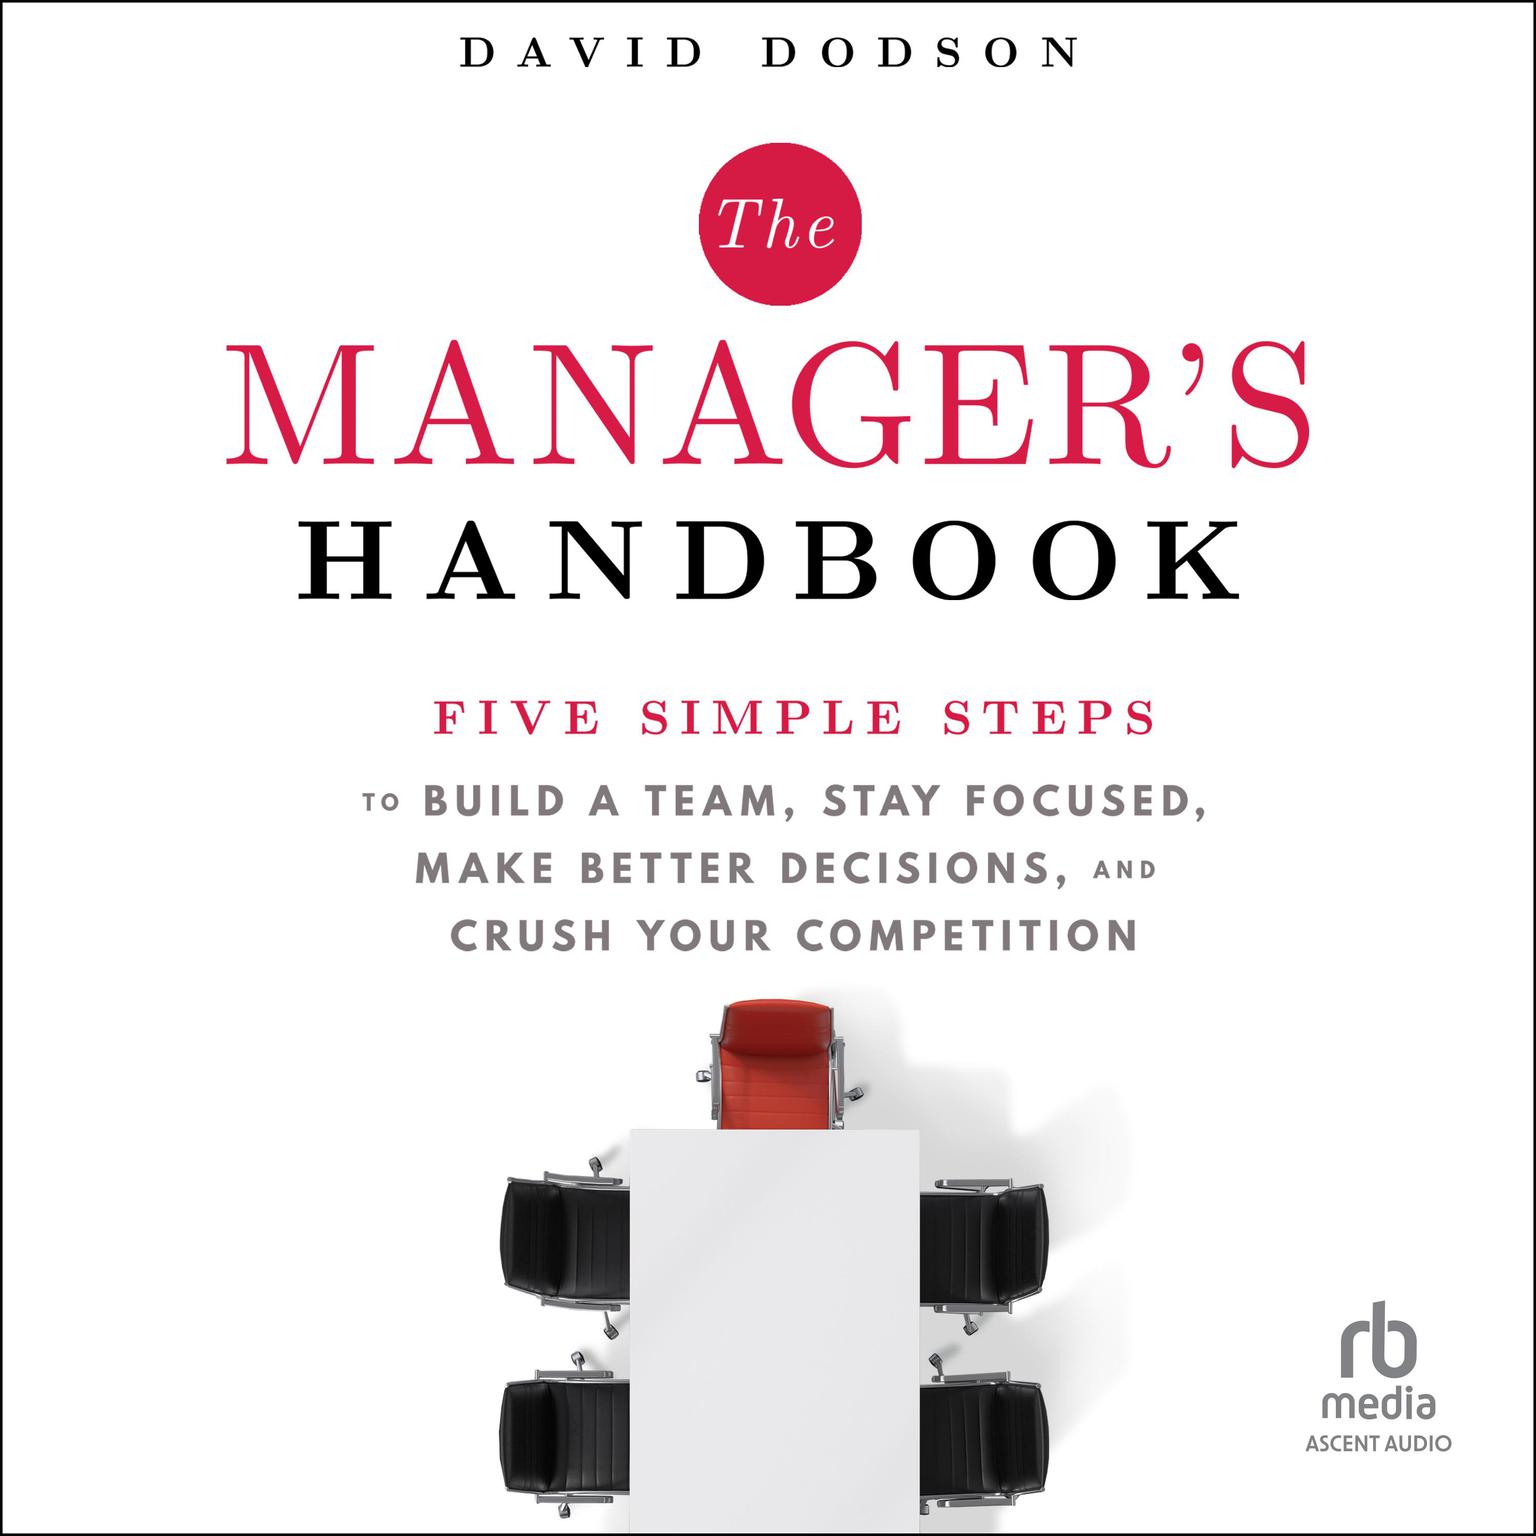 The Managers Handbook: Five Simple Steps to Build a Team, Stay Focused, Make Better Decisions, and Crush Your Competition Audiobook, by David Dodson